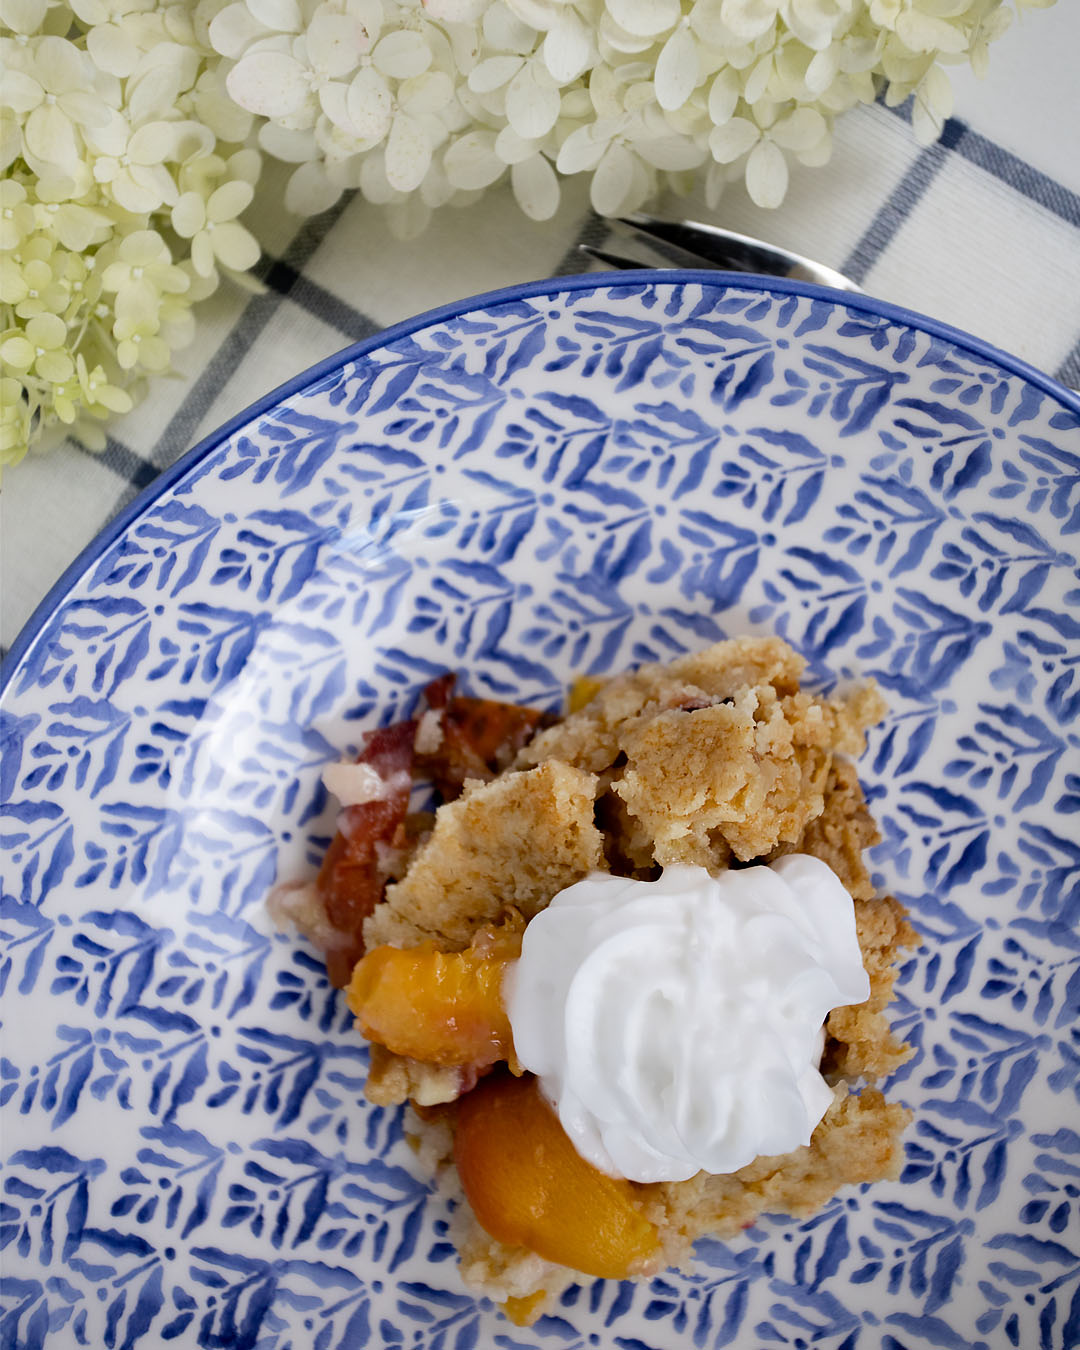 Try this super simple three ingredient peach cobbler to take advantage of all those fresh peaches you've been picking at the orchard this summer!